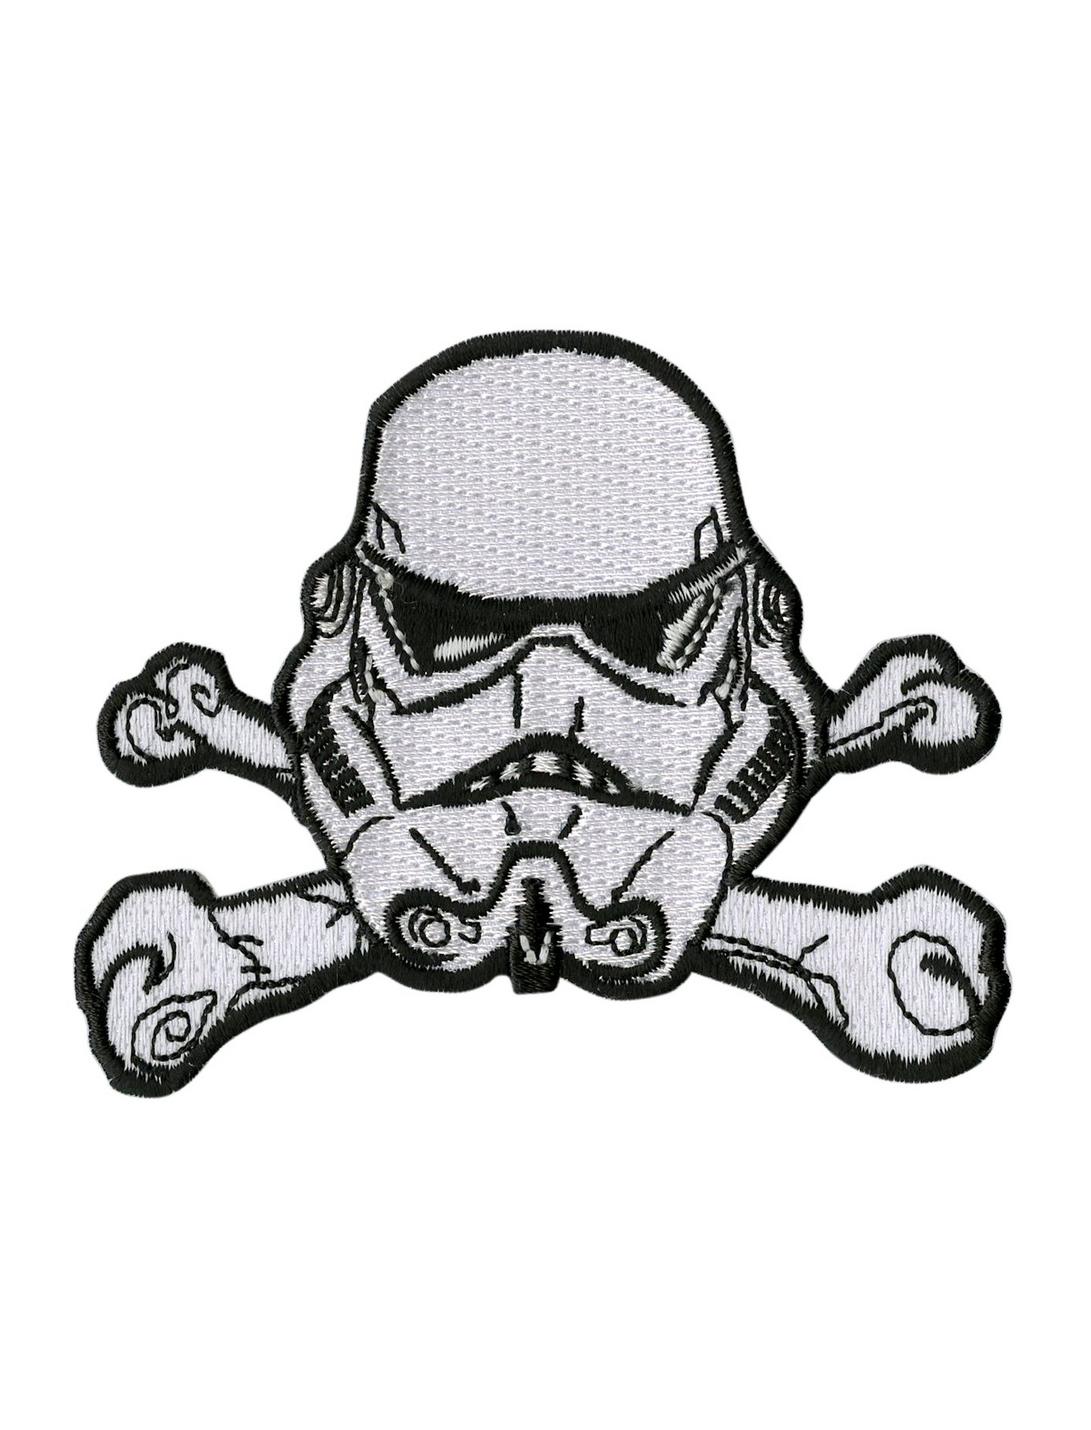 Loungefly Star Wars Stormtrooper Crossbones Iron-On Patch, , hi-res